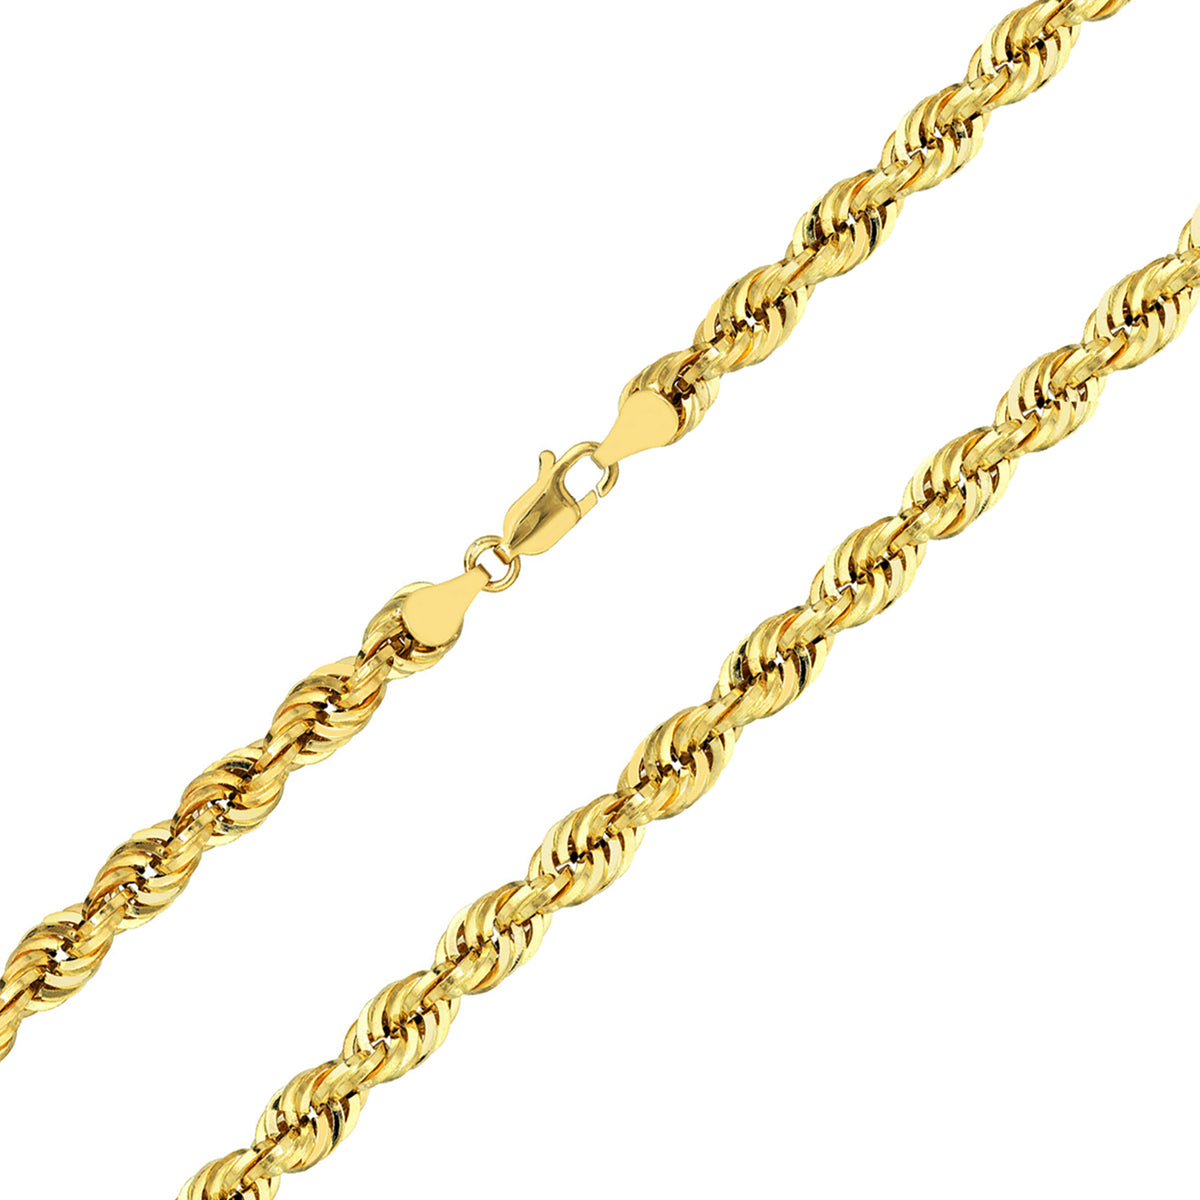 Solid 14k Yellow Gold 5mm Rope Chain Necklace with Lobster Lock - Diamond-Cut